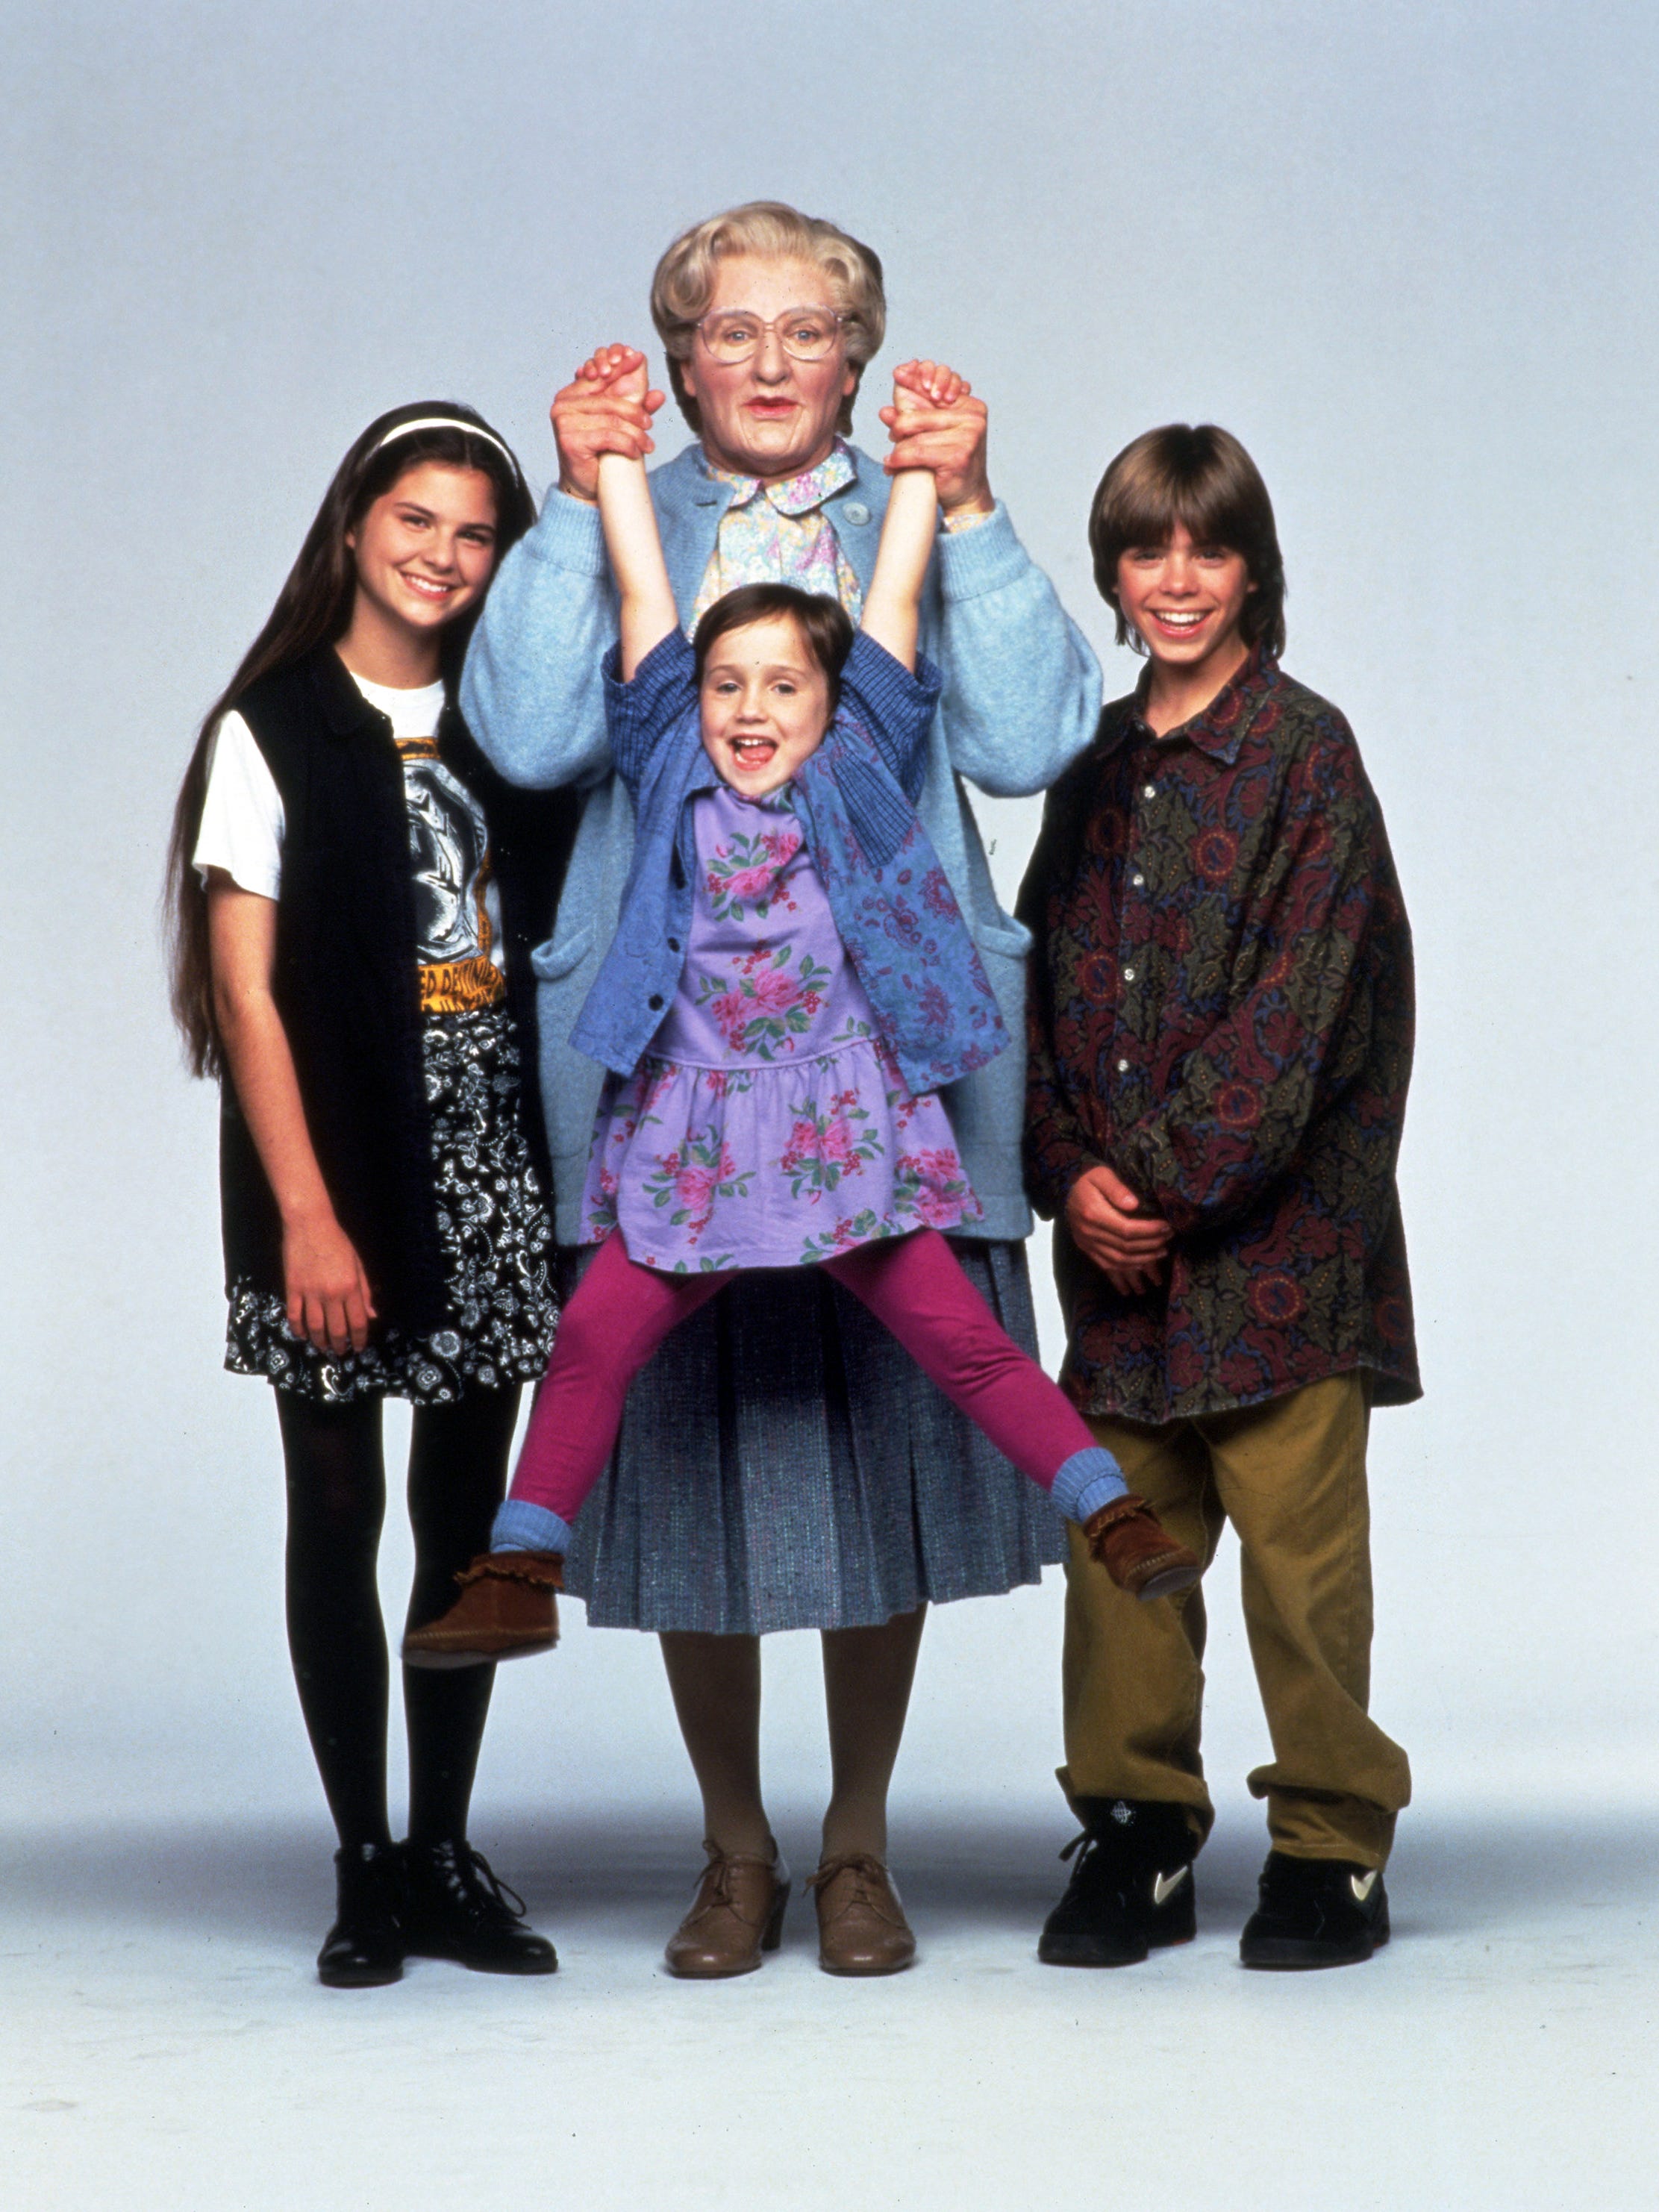 Mara Wilson The Little Girl From Mrs Doubtfire Writes Moving Tribute To Robin Williams